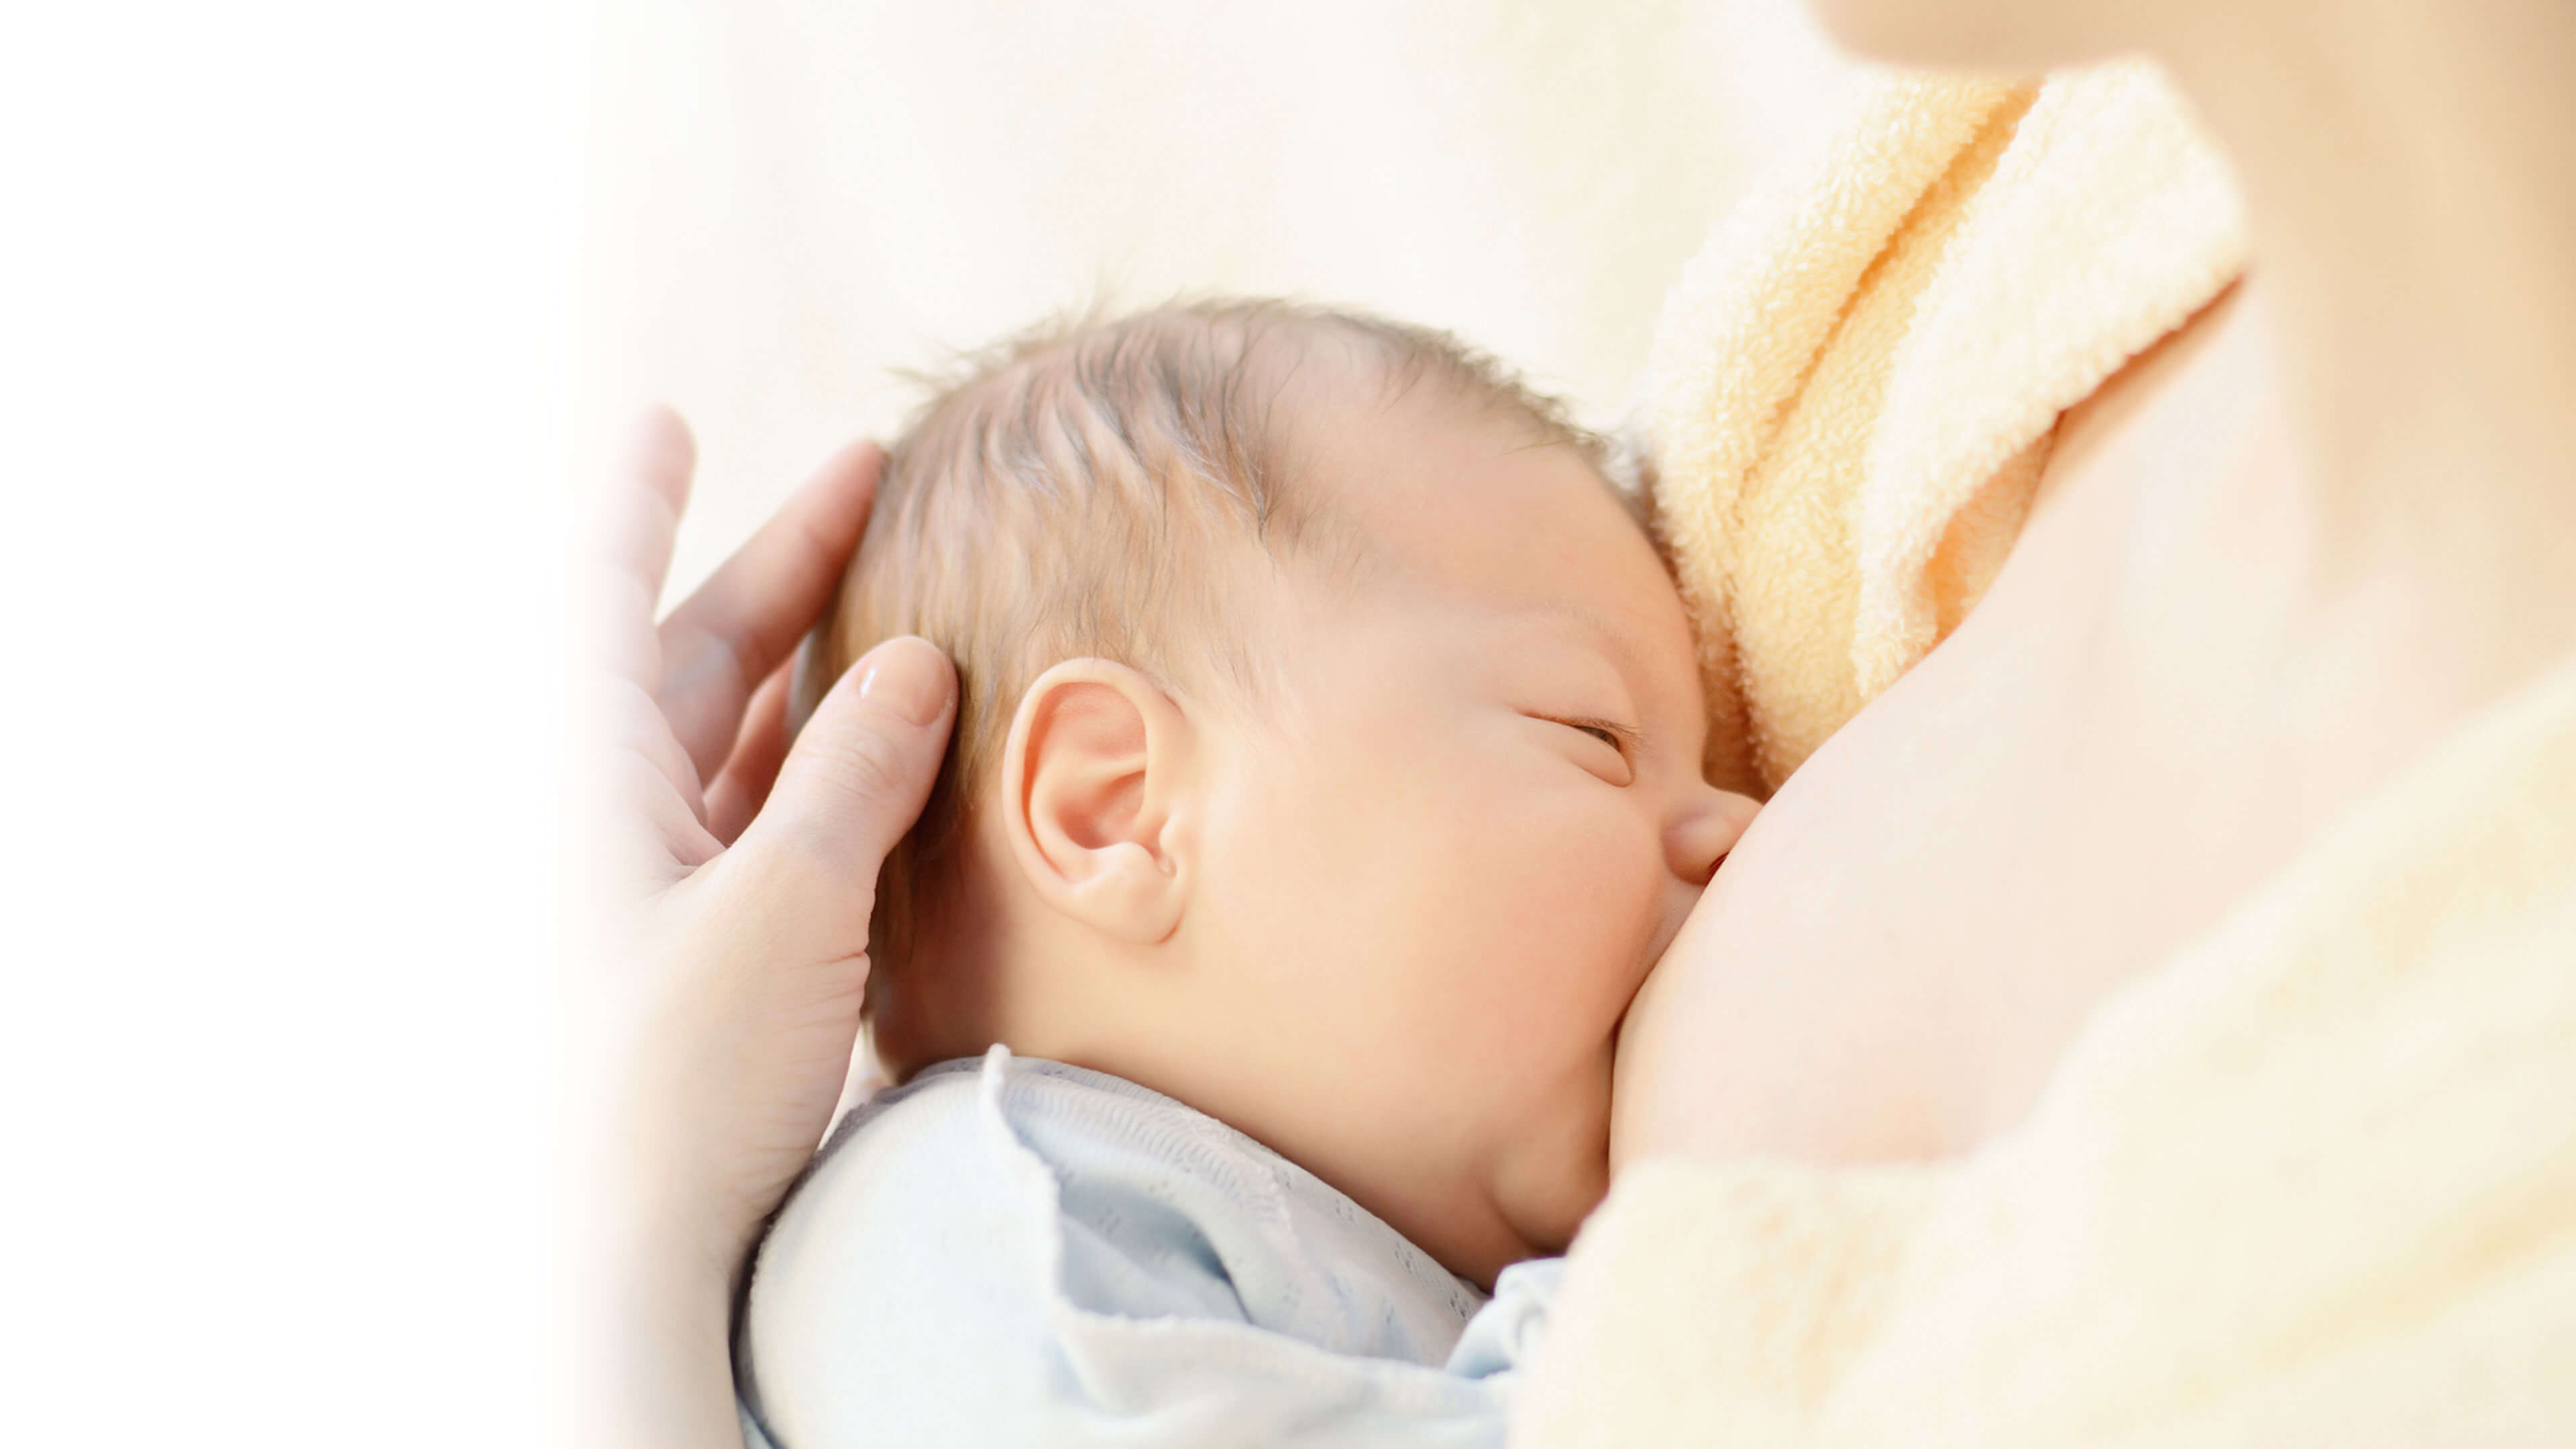 Pin on Pregnancy and Breastfeeding